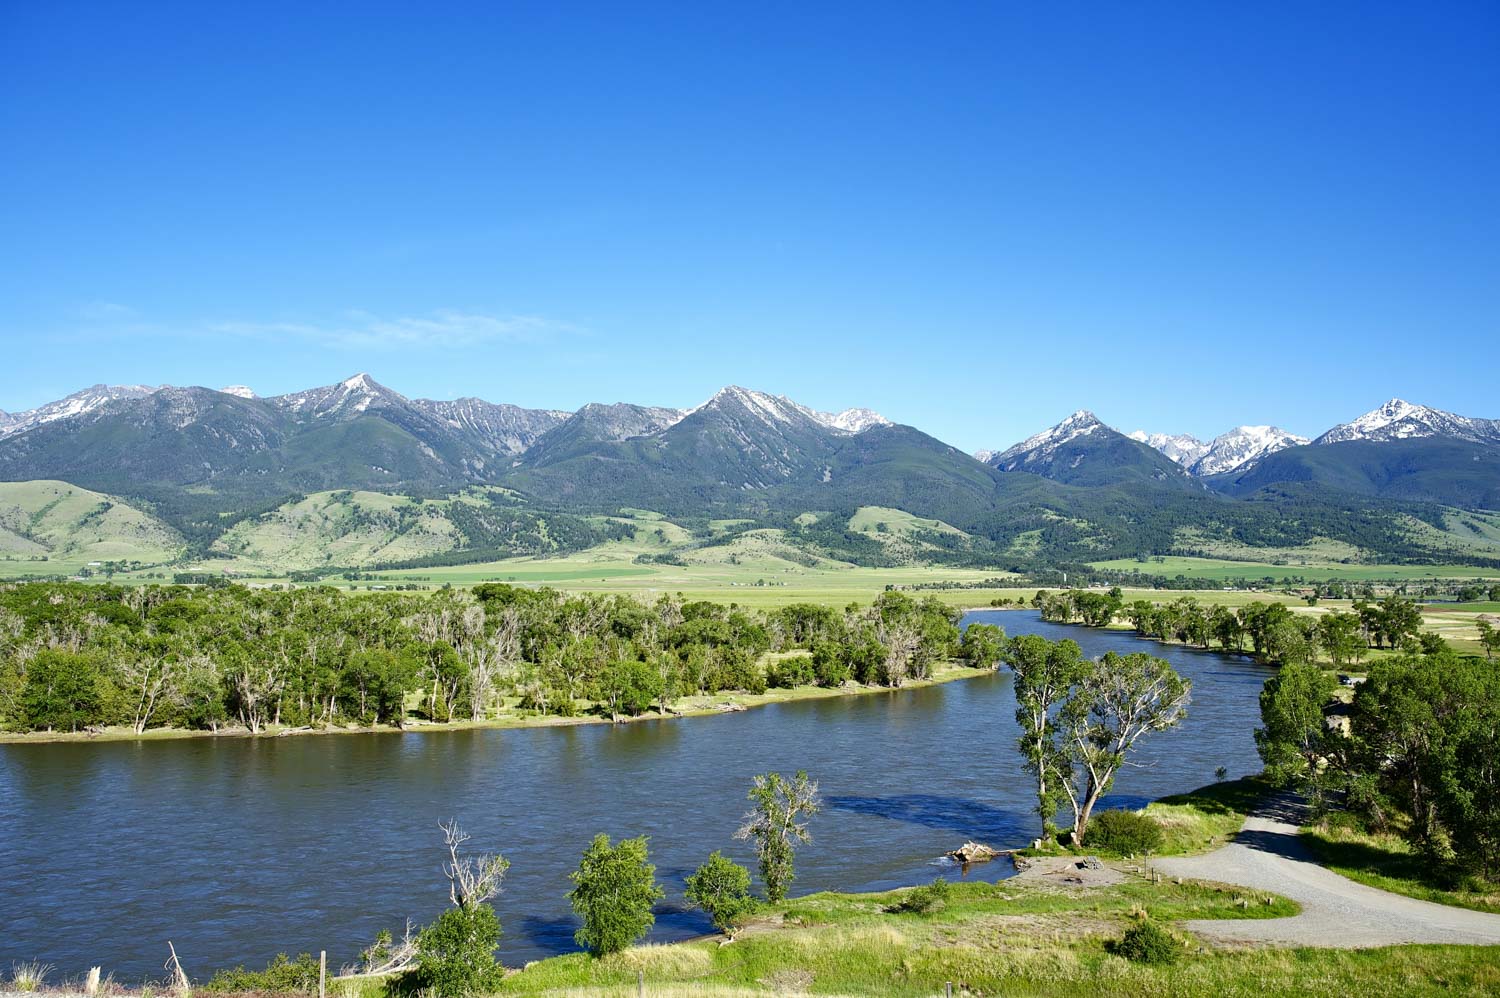 The pristine camp site by the Yellowstone River Near Livingston, Montana